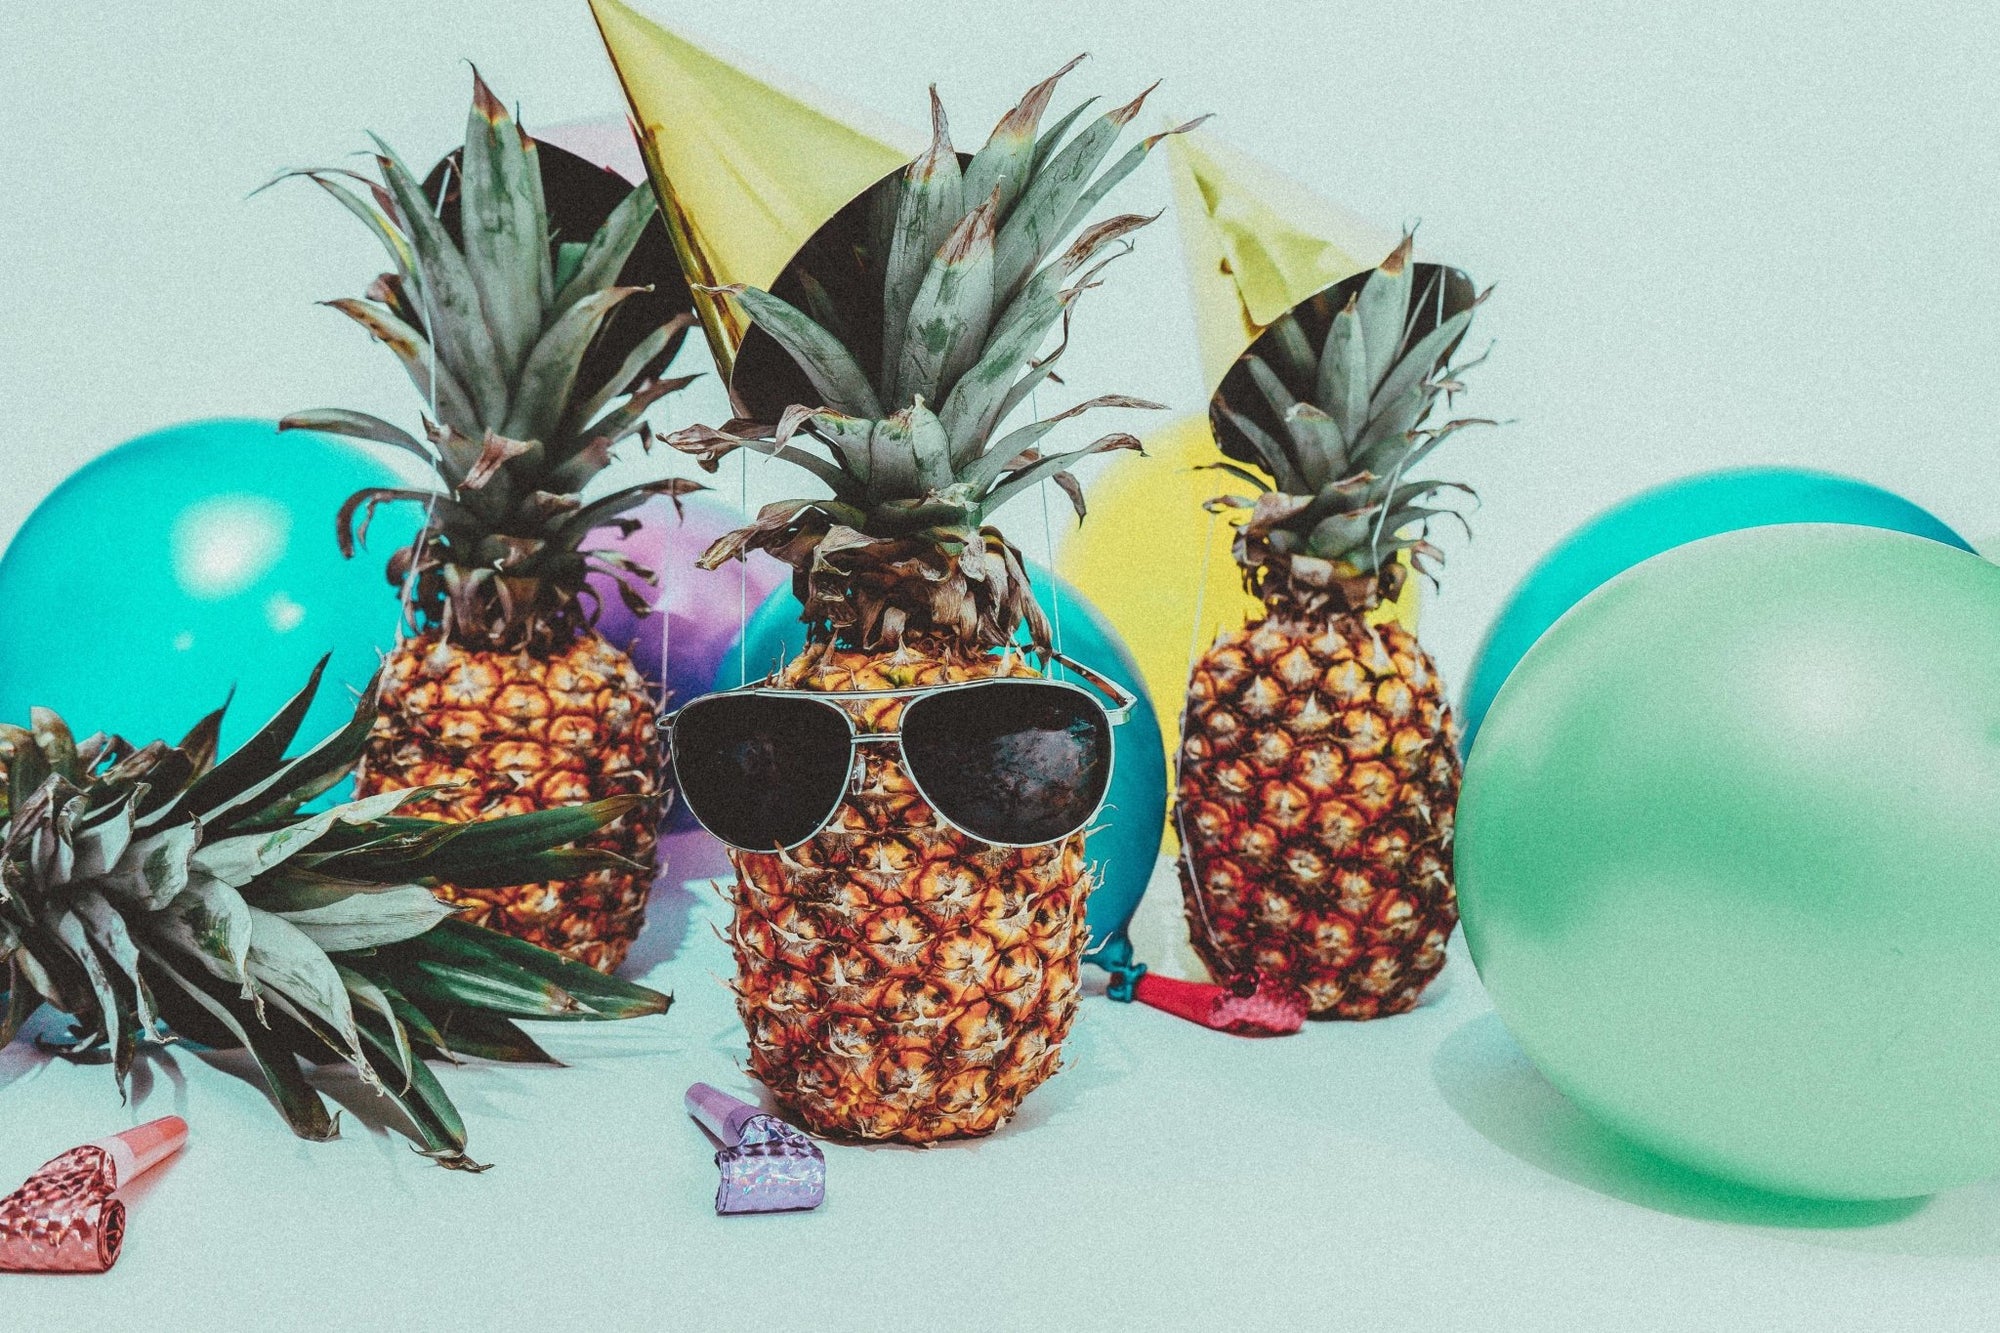 Tropical Party Ideas for Adults and Kids | Daisy Lane Company